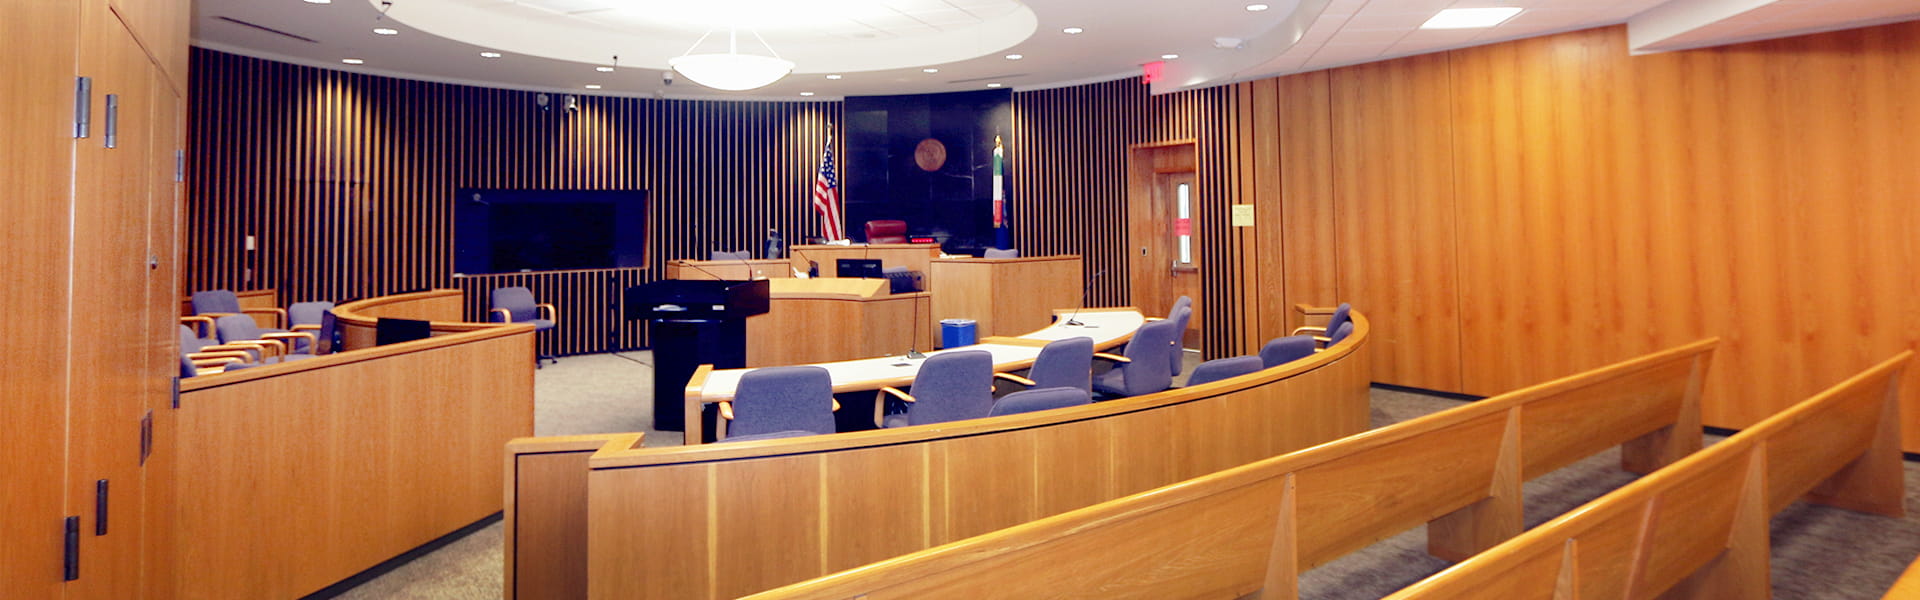 Interior of Macomb County courtroom.